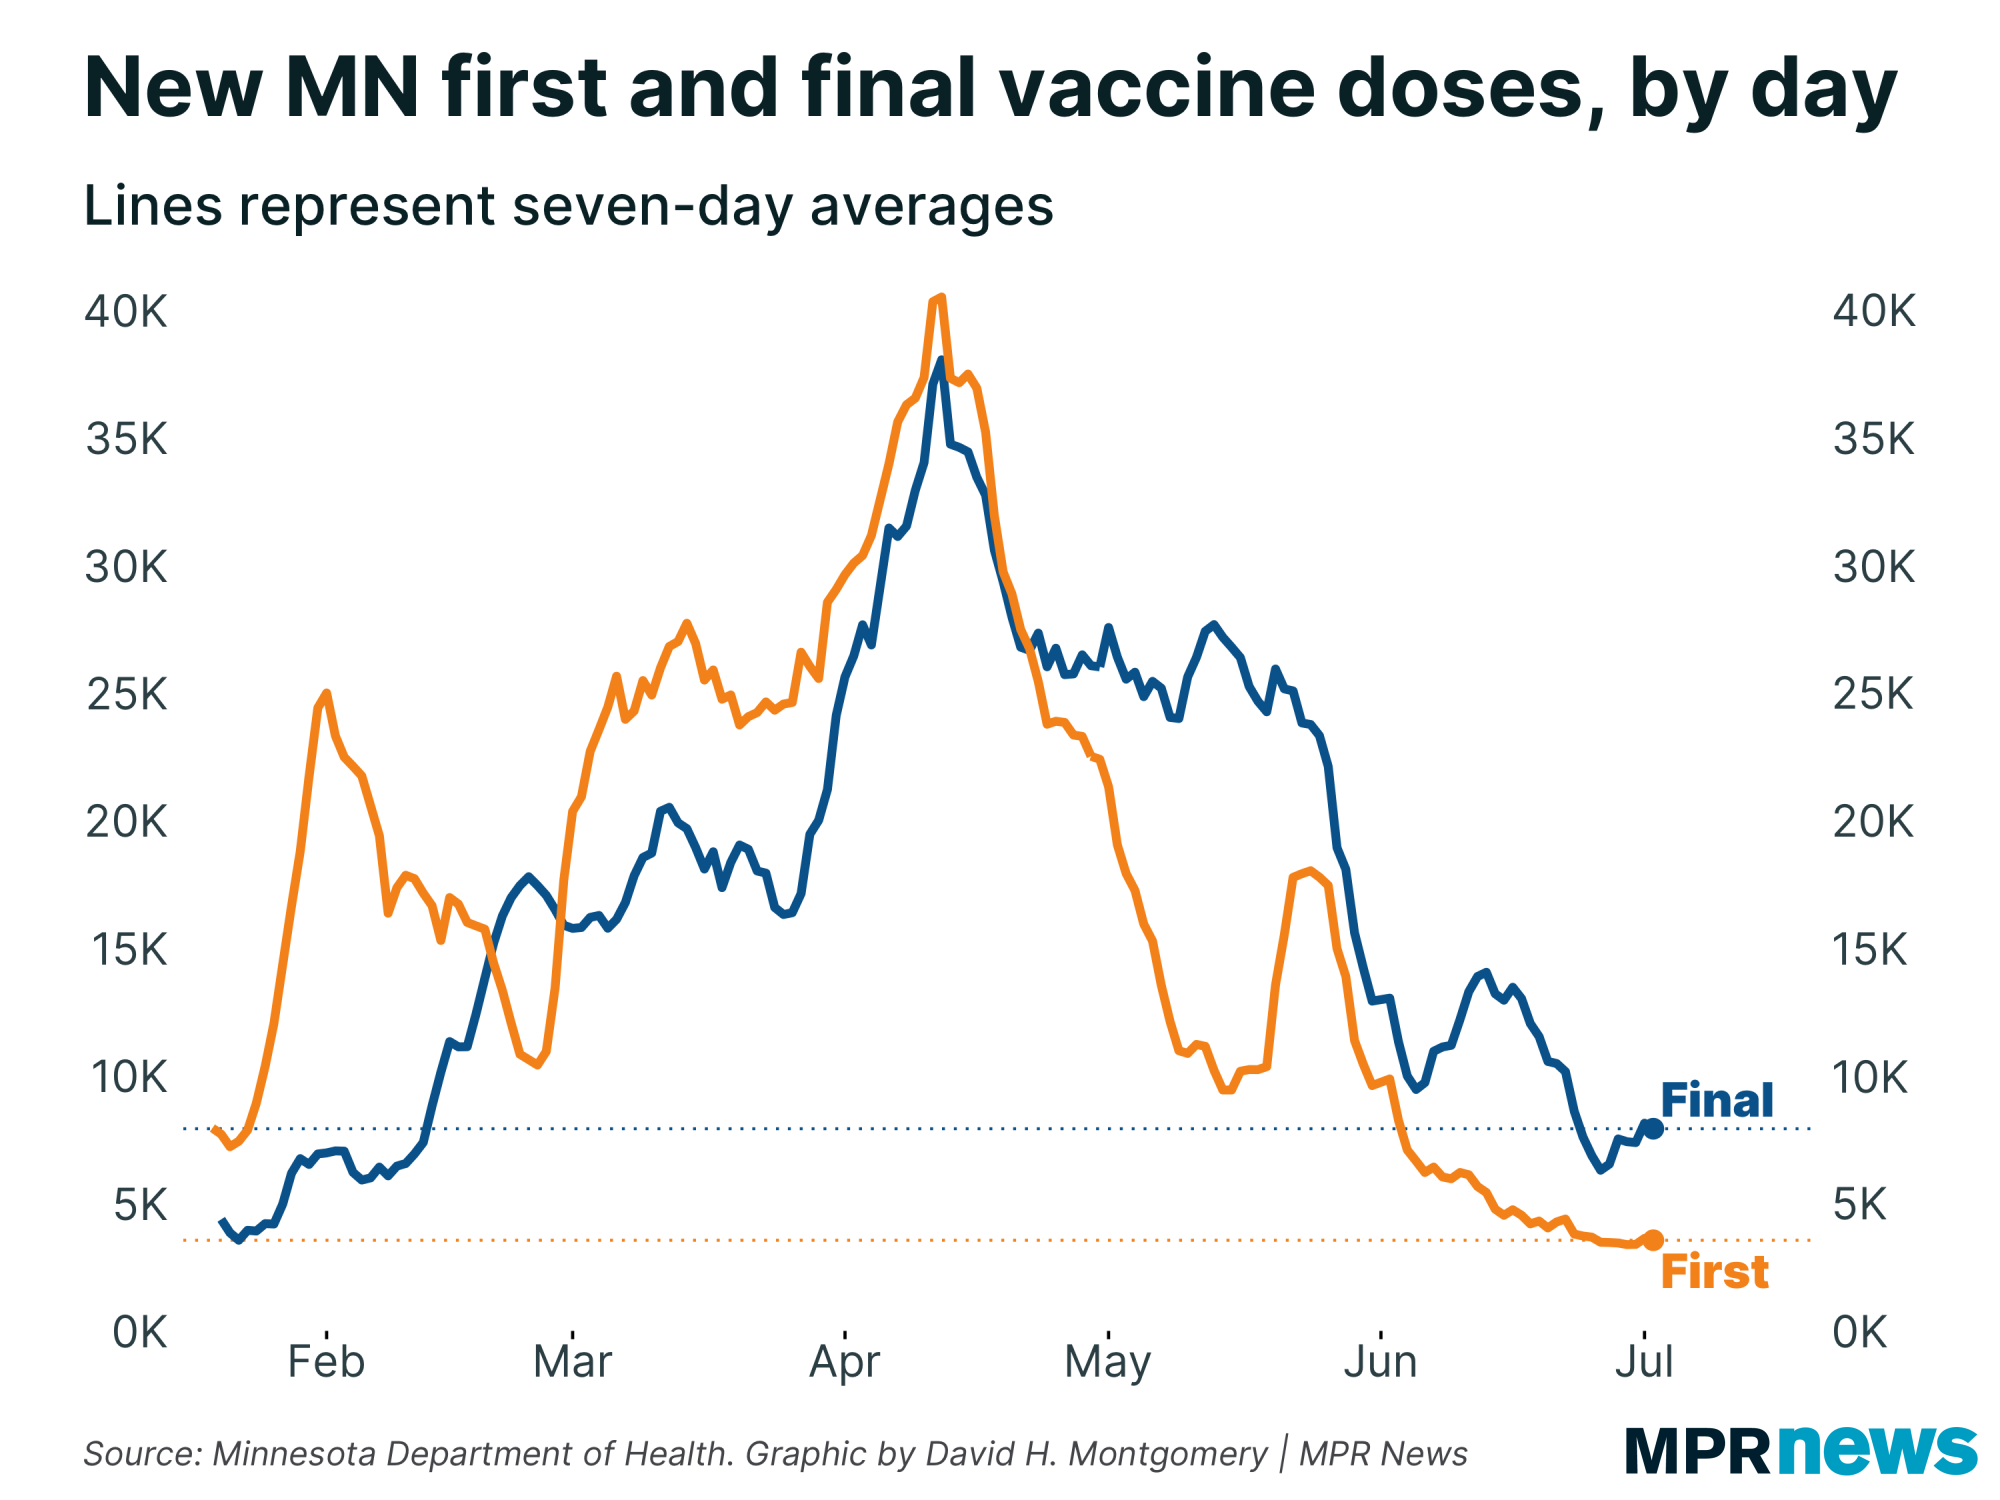 Graph of new first and final vaccine doses in Minnesota